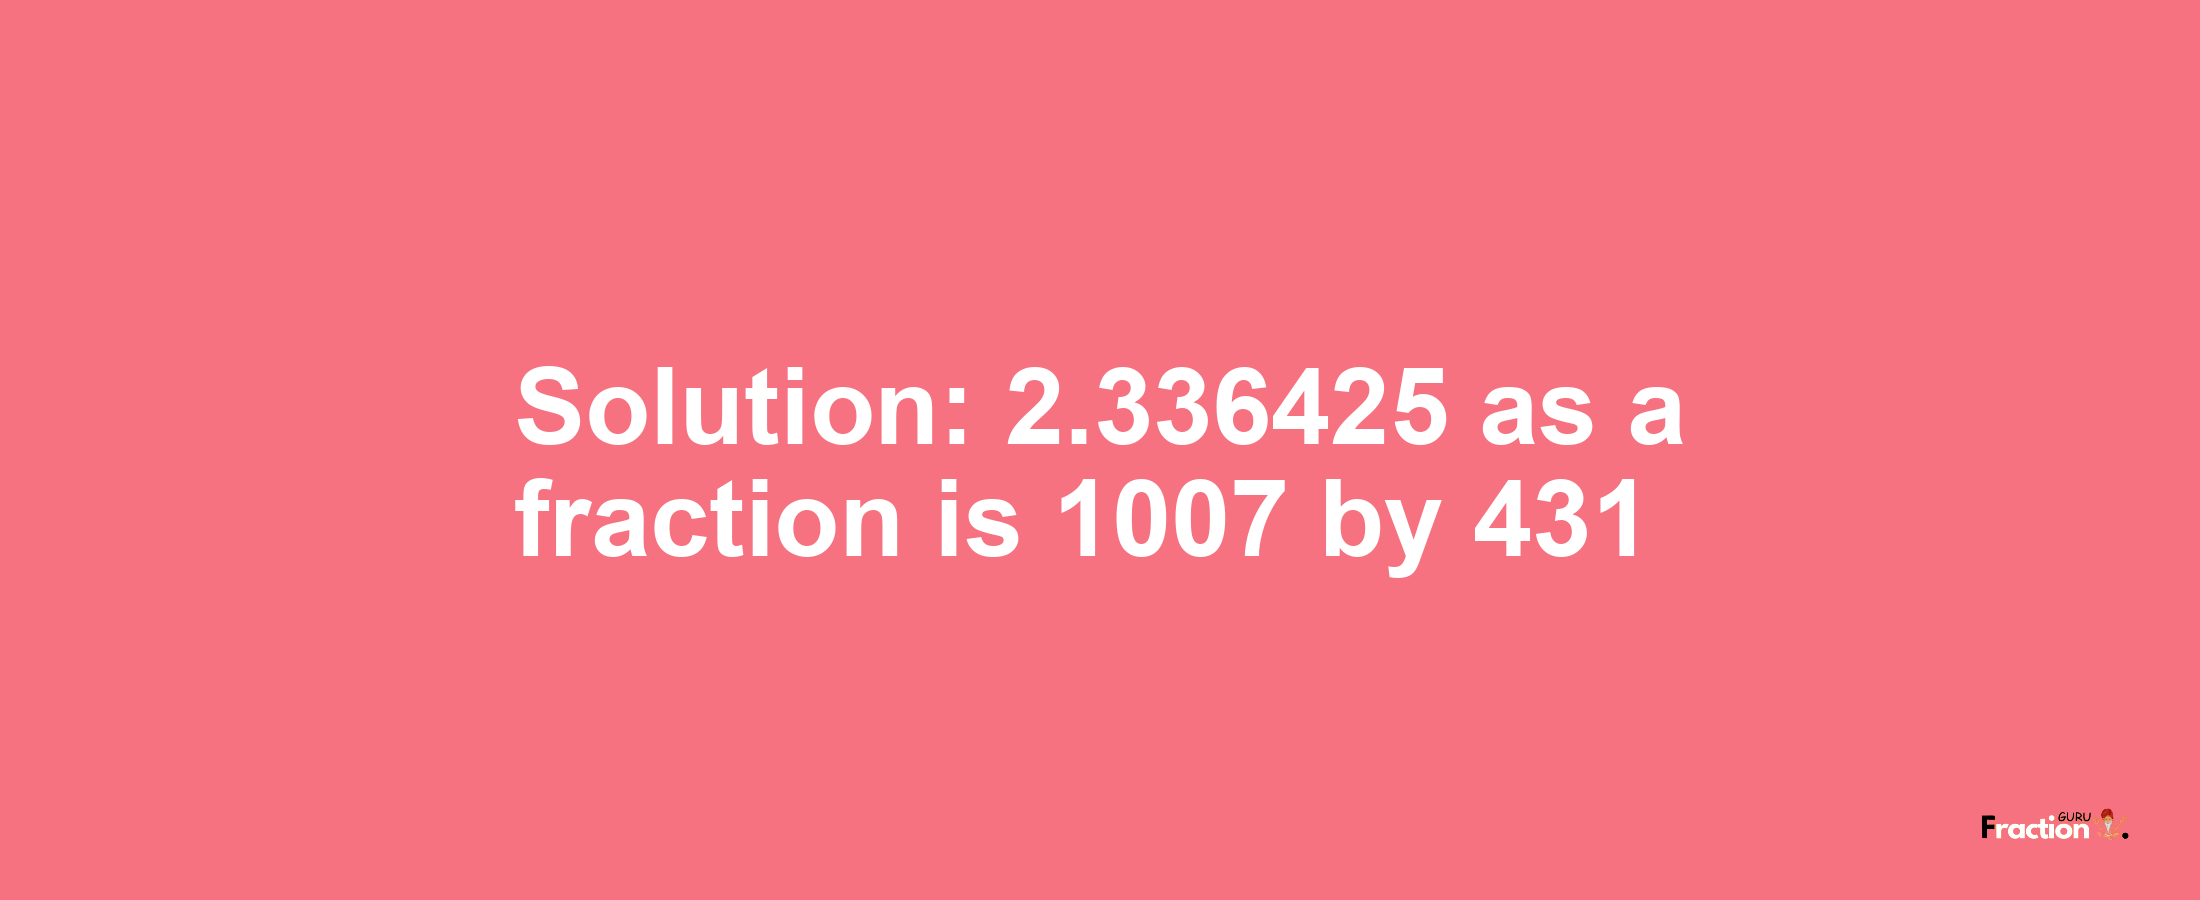 Solution:2.336425 as a fraction is 1007/431